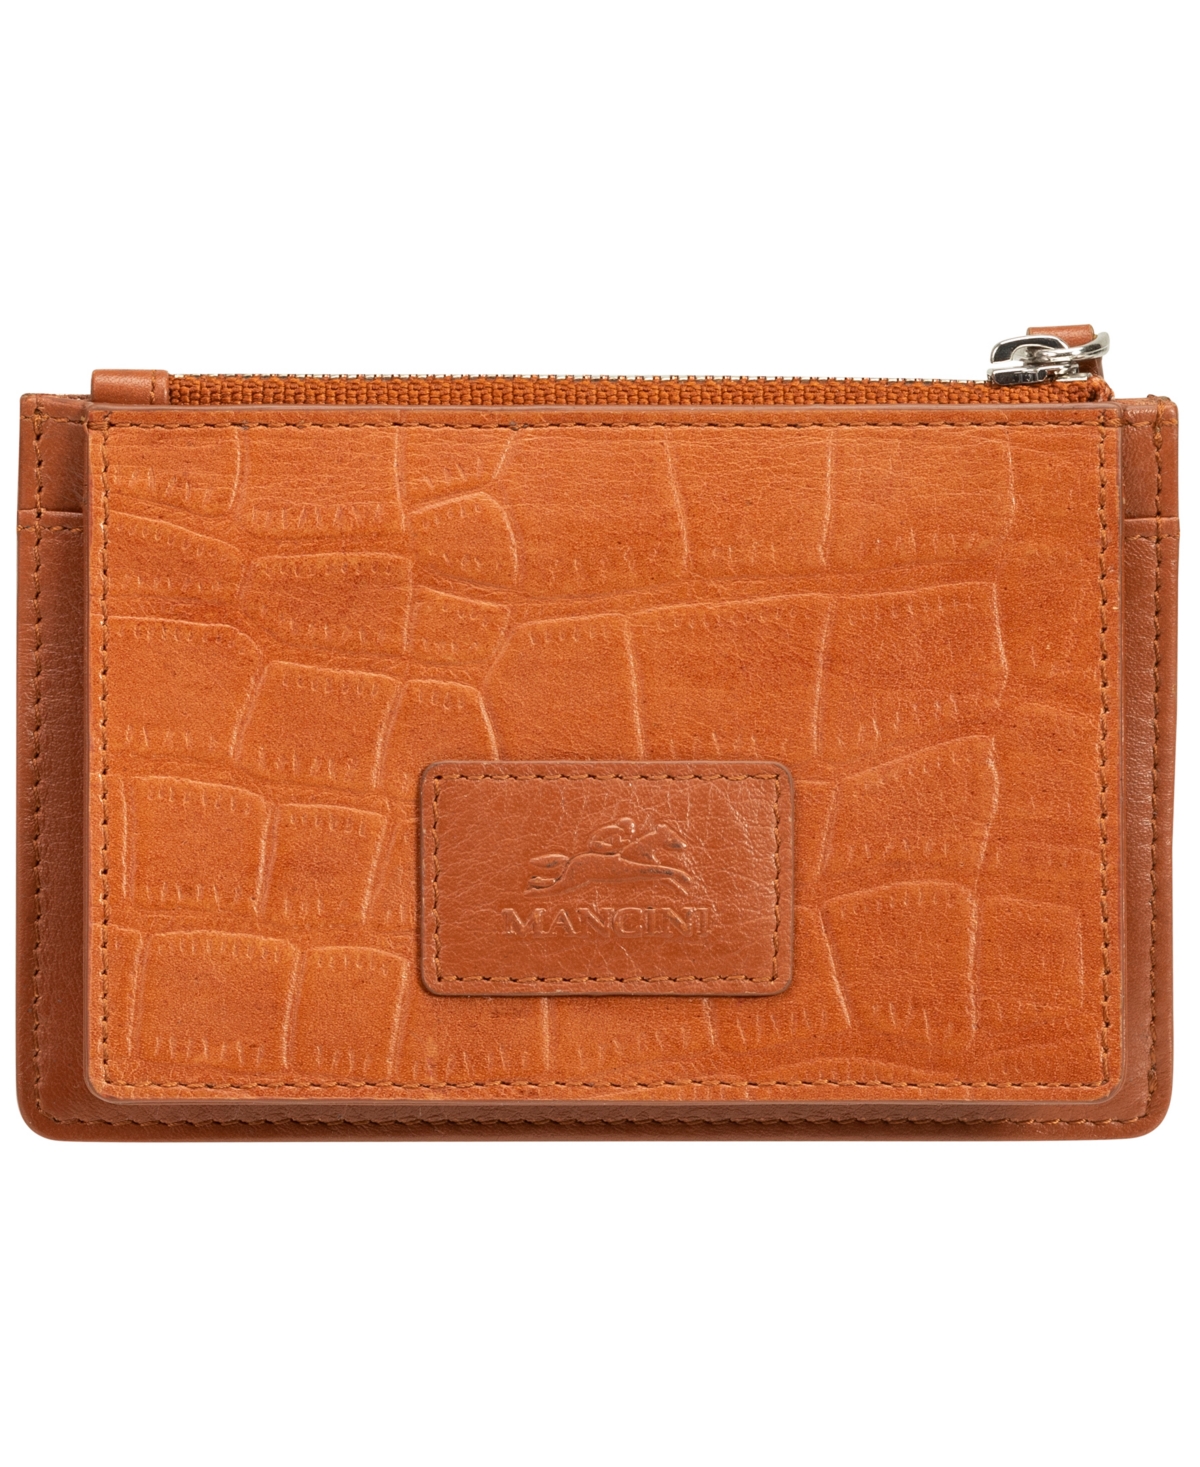 Women's Croco Collection Rfid Secure Card Case and Coin Pocket - Tan